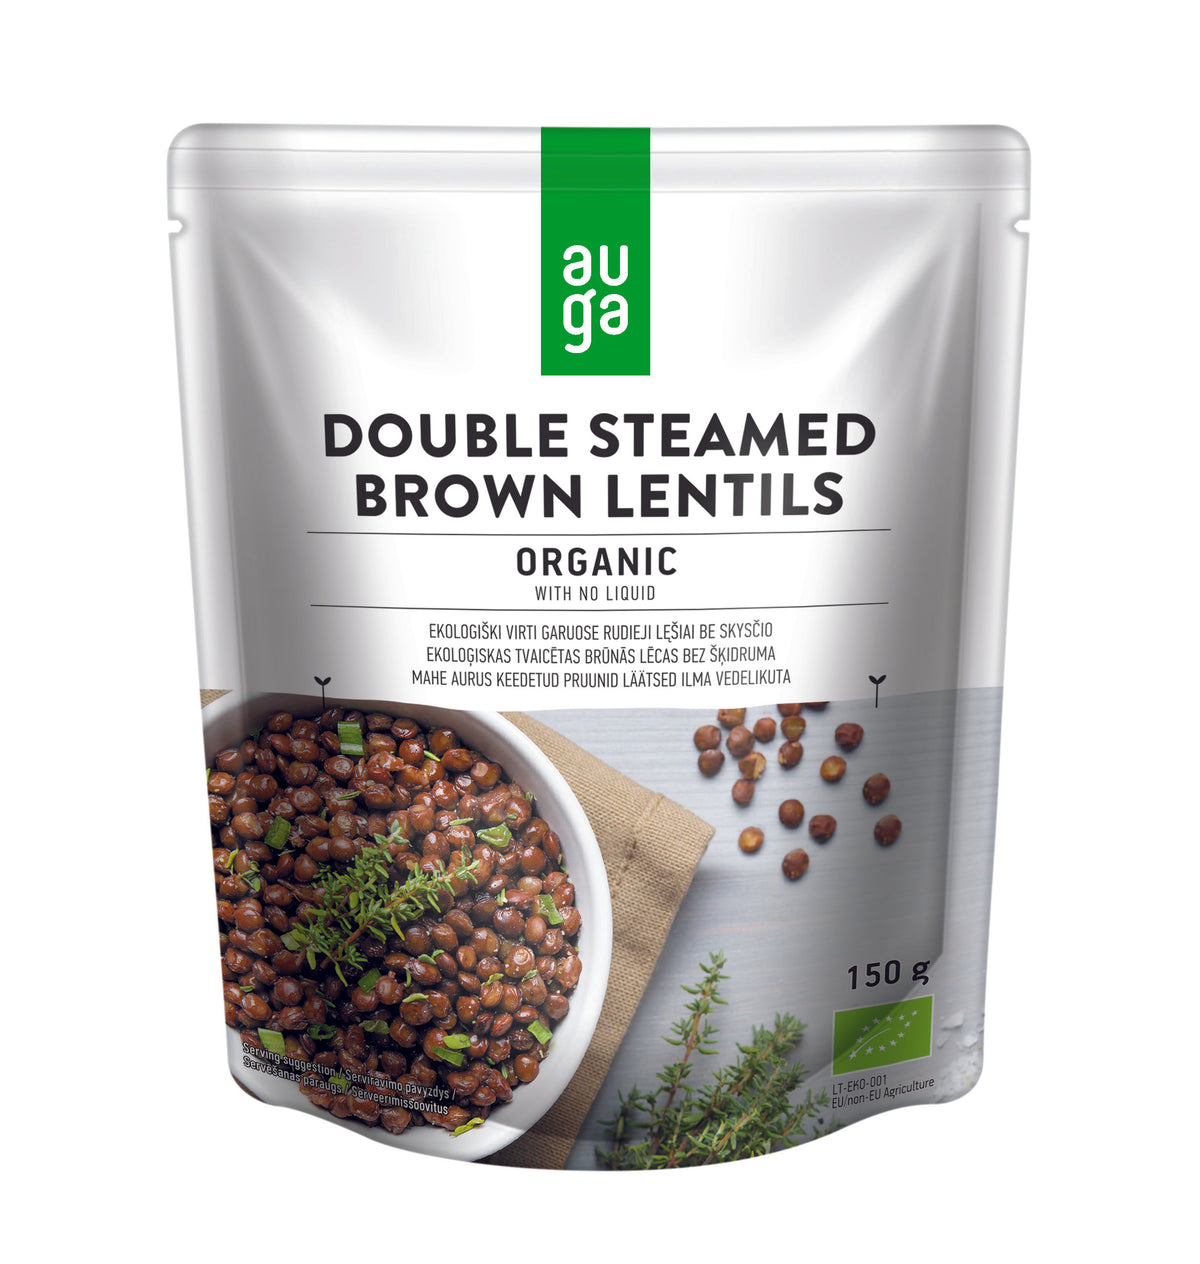 Auga organic double streamed brown lentils 150g